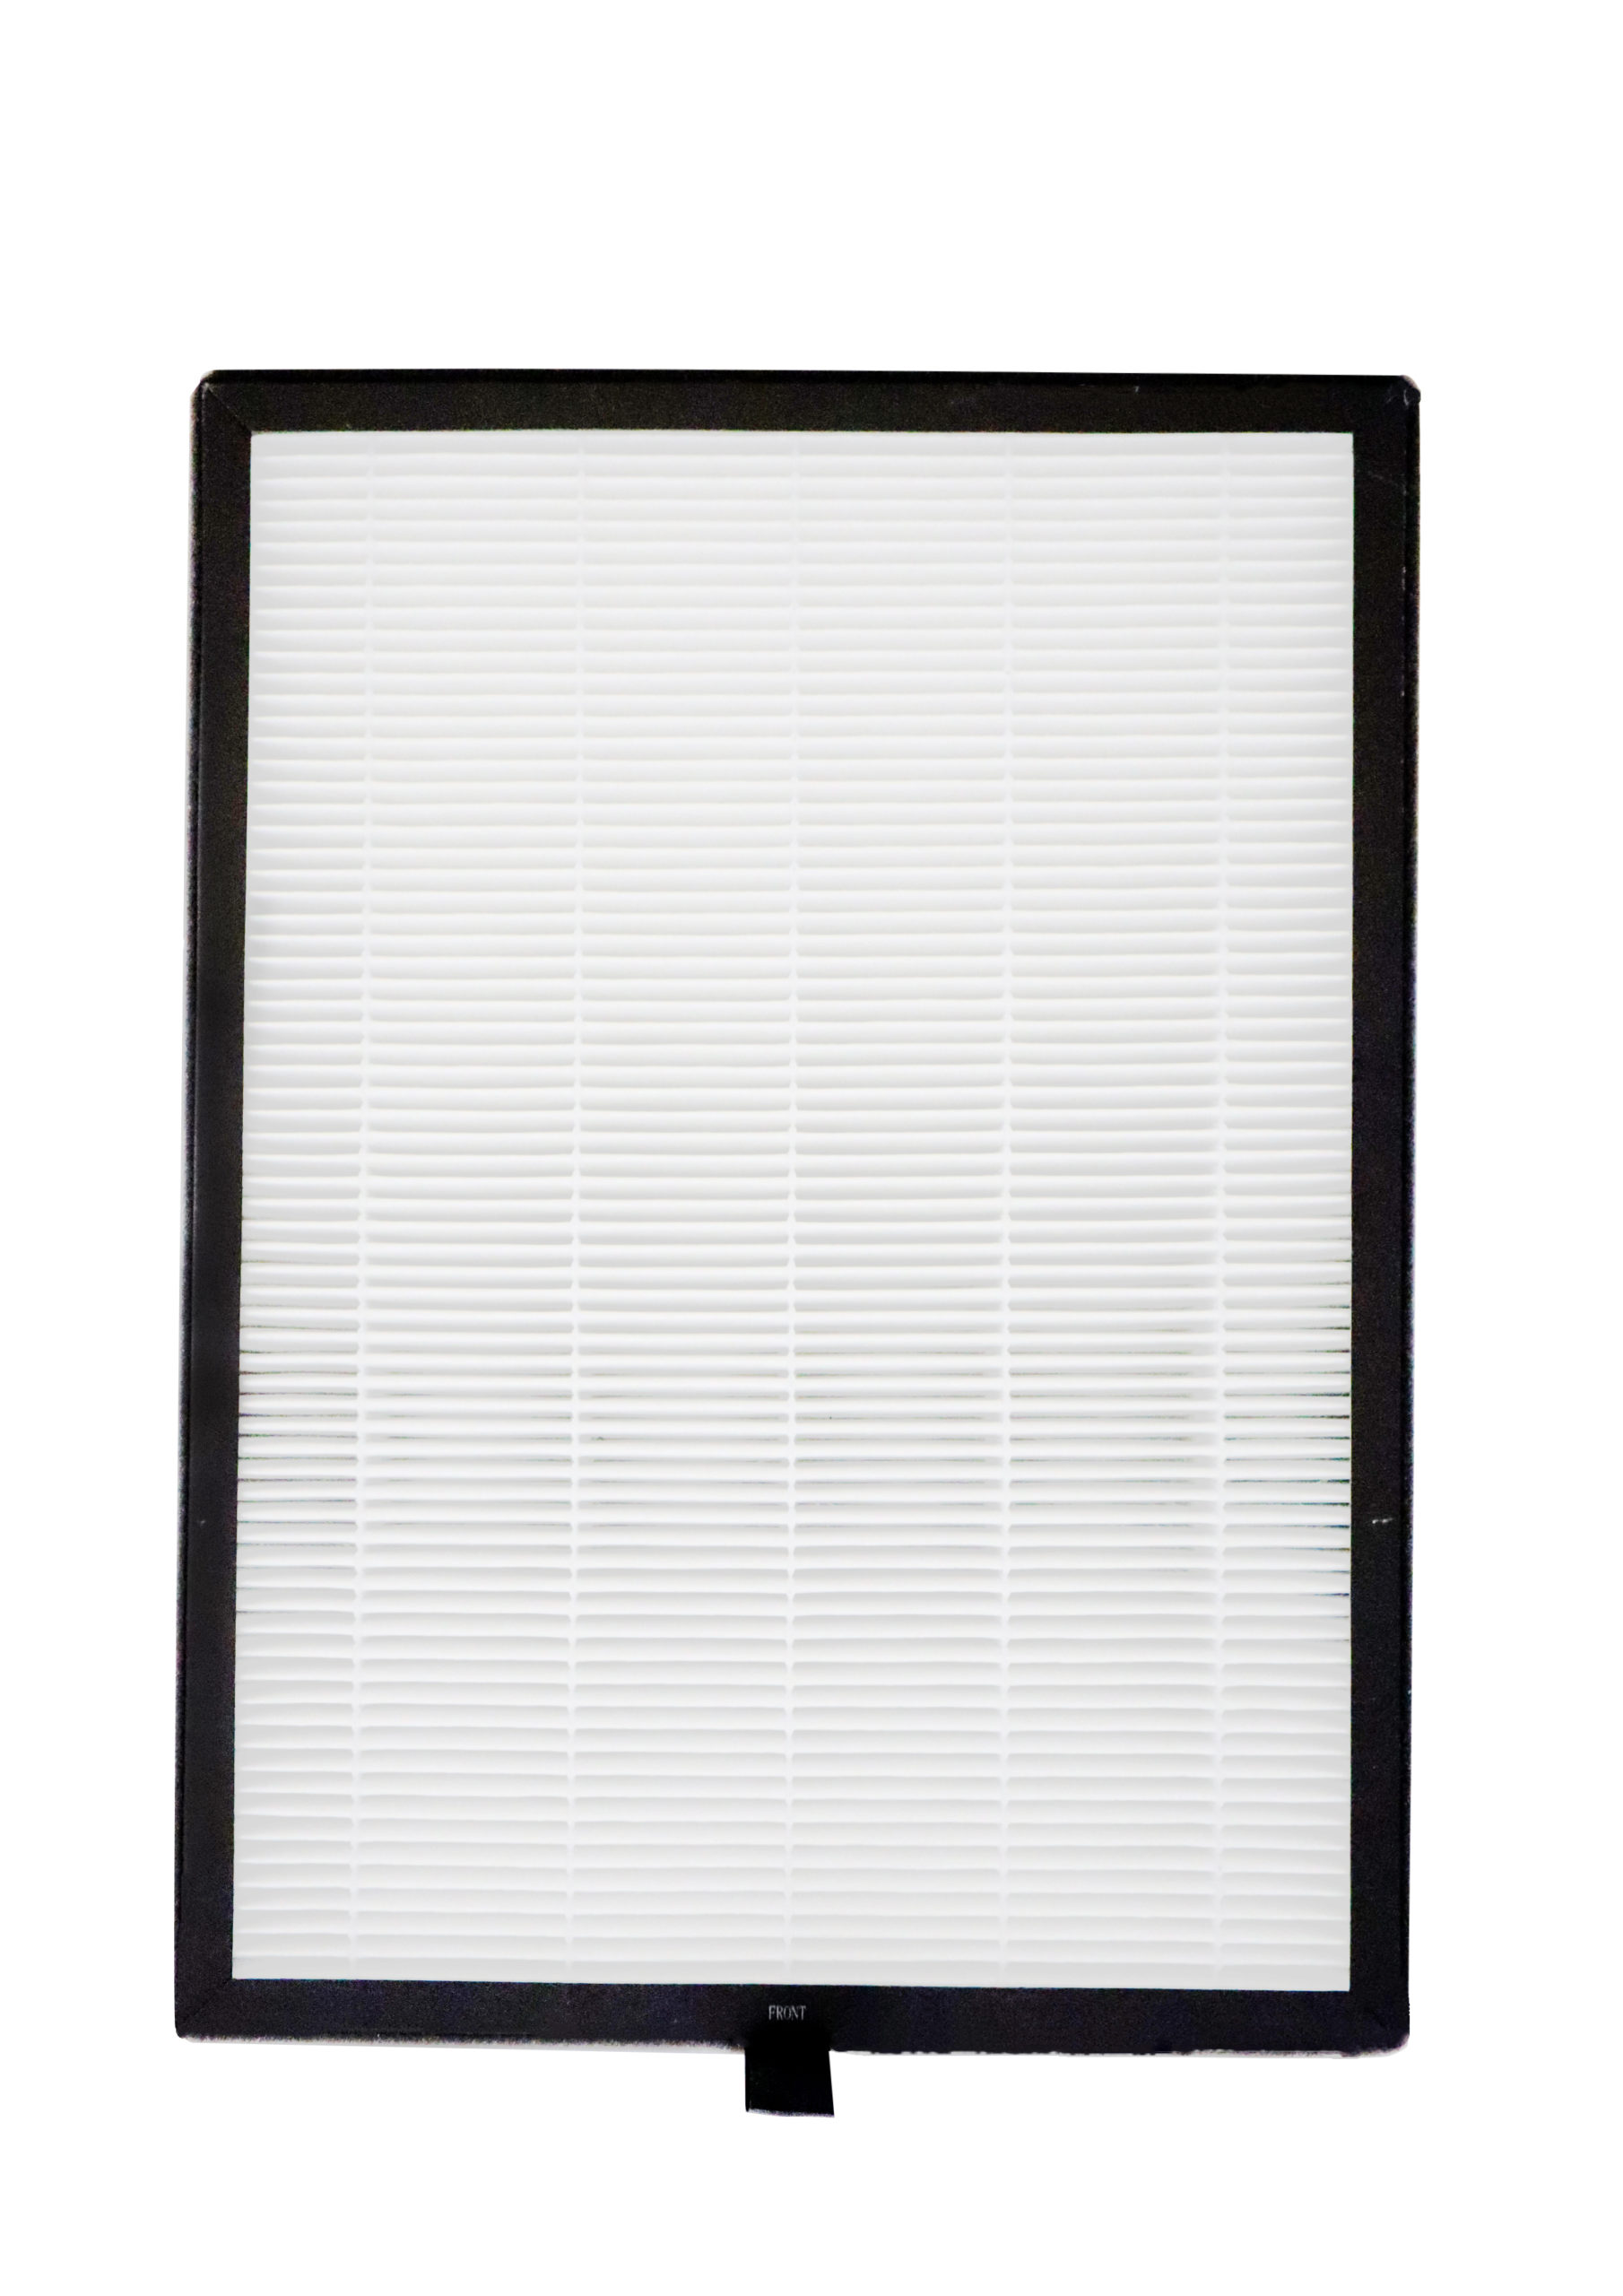 HEPA Filter H13 for Activated Carbon Cell PLR-Mini, -Silent, -Silent+.